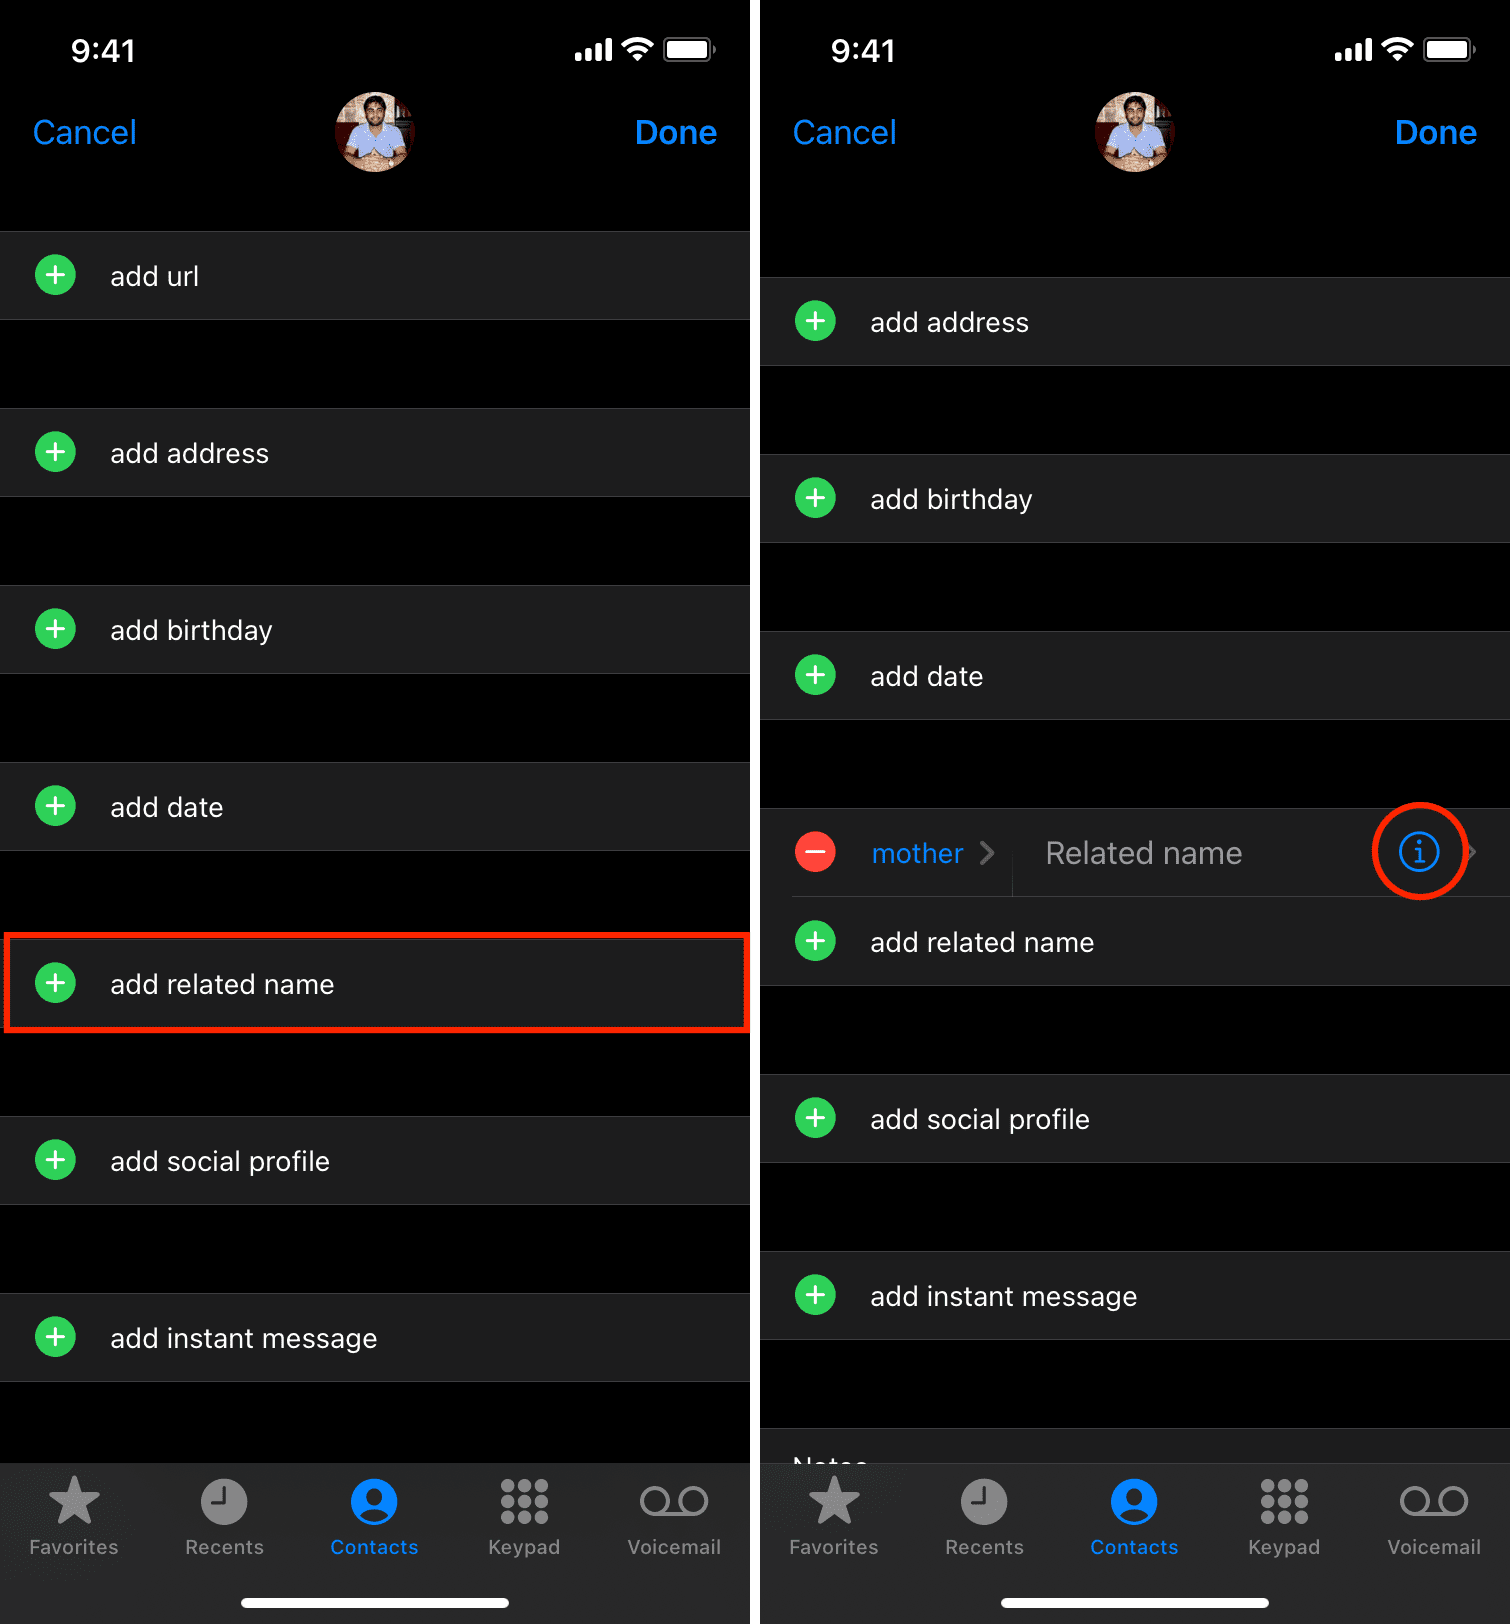 add related name in iPhone Contacts app